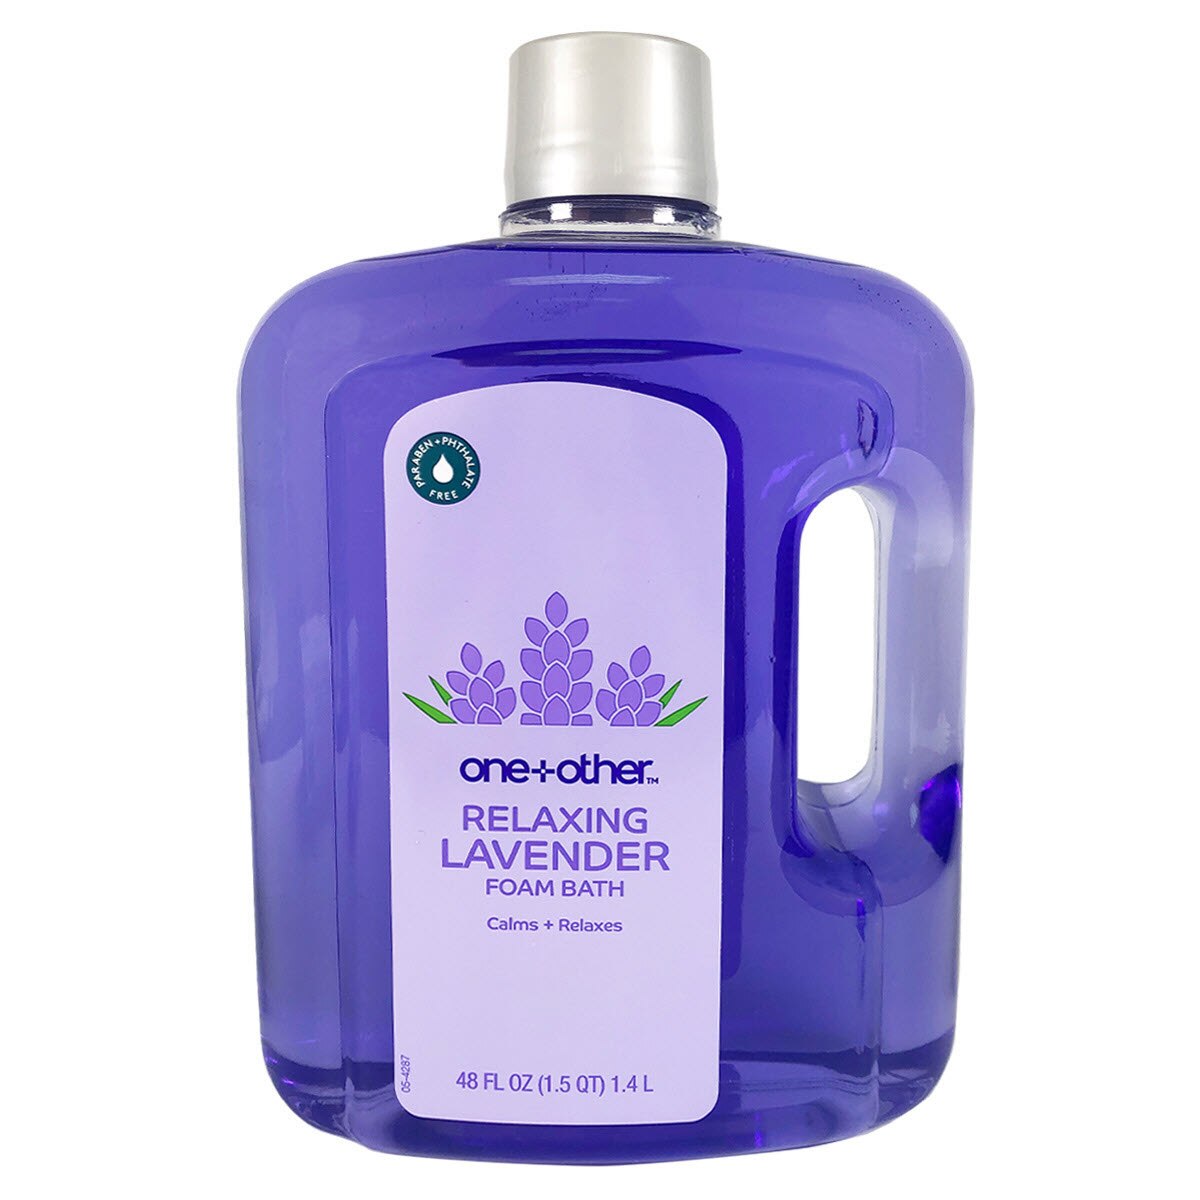 one+other Relaxing Lavender Foam Bath, 48 OZ